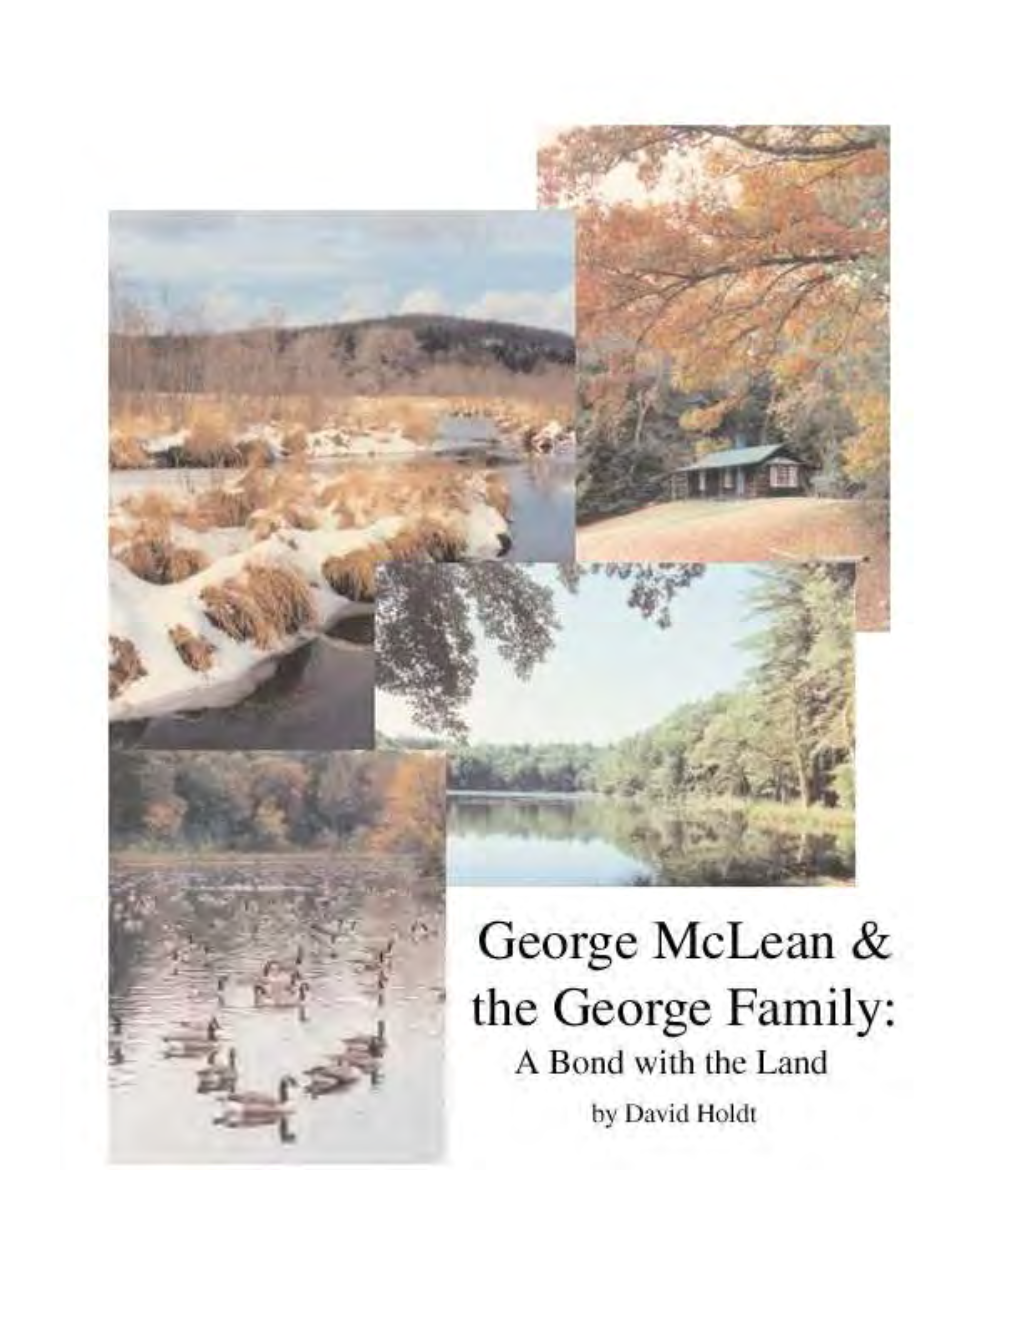 George Mclean & the George Family